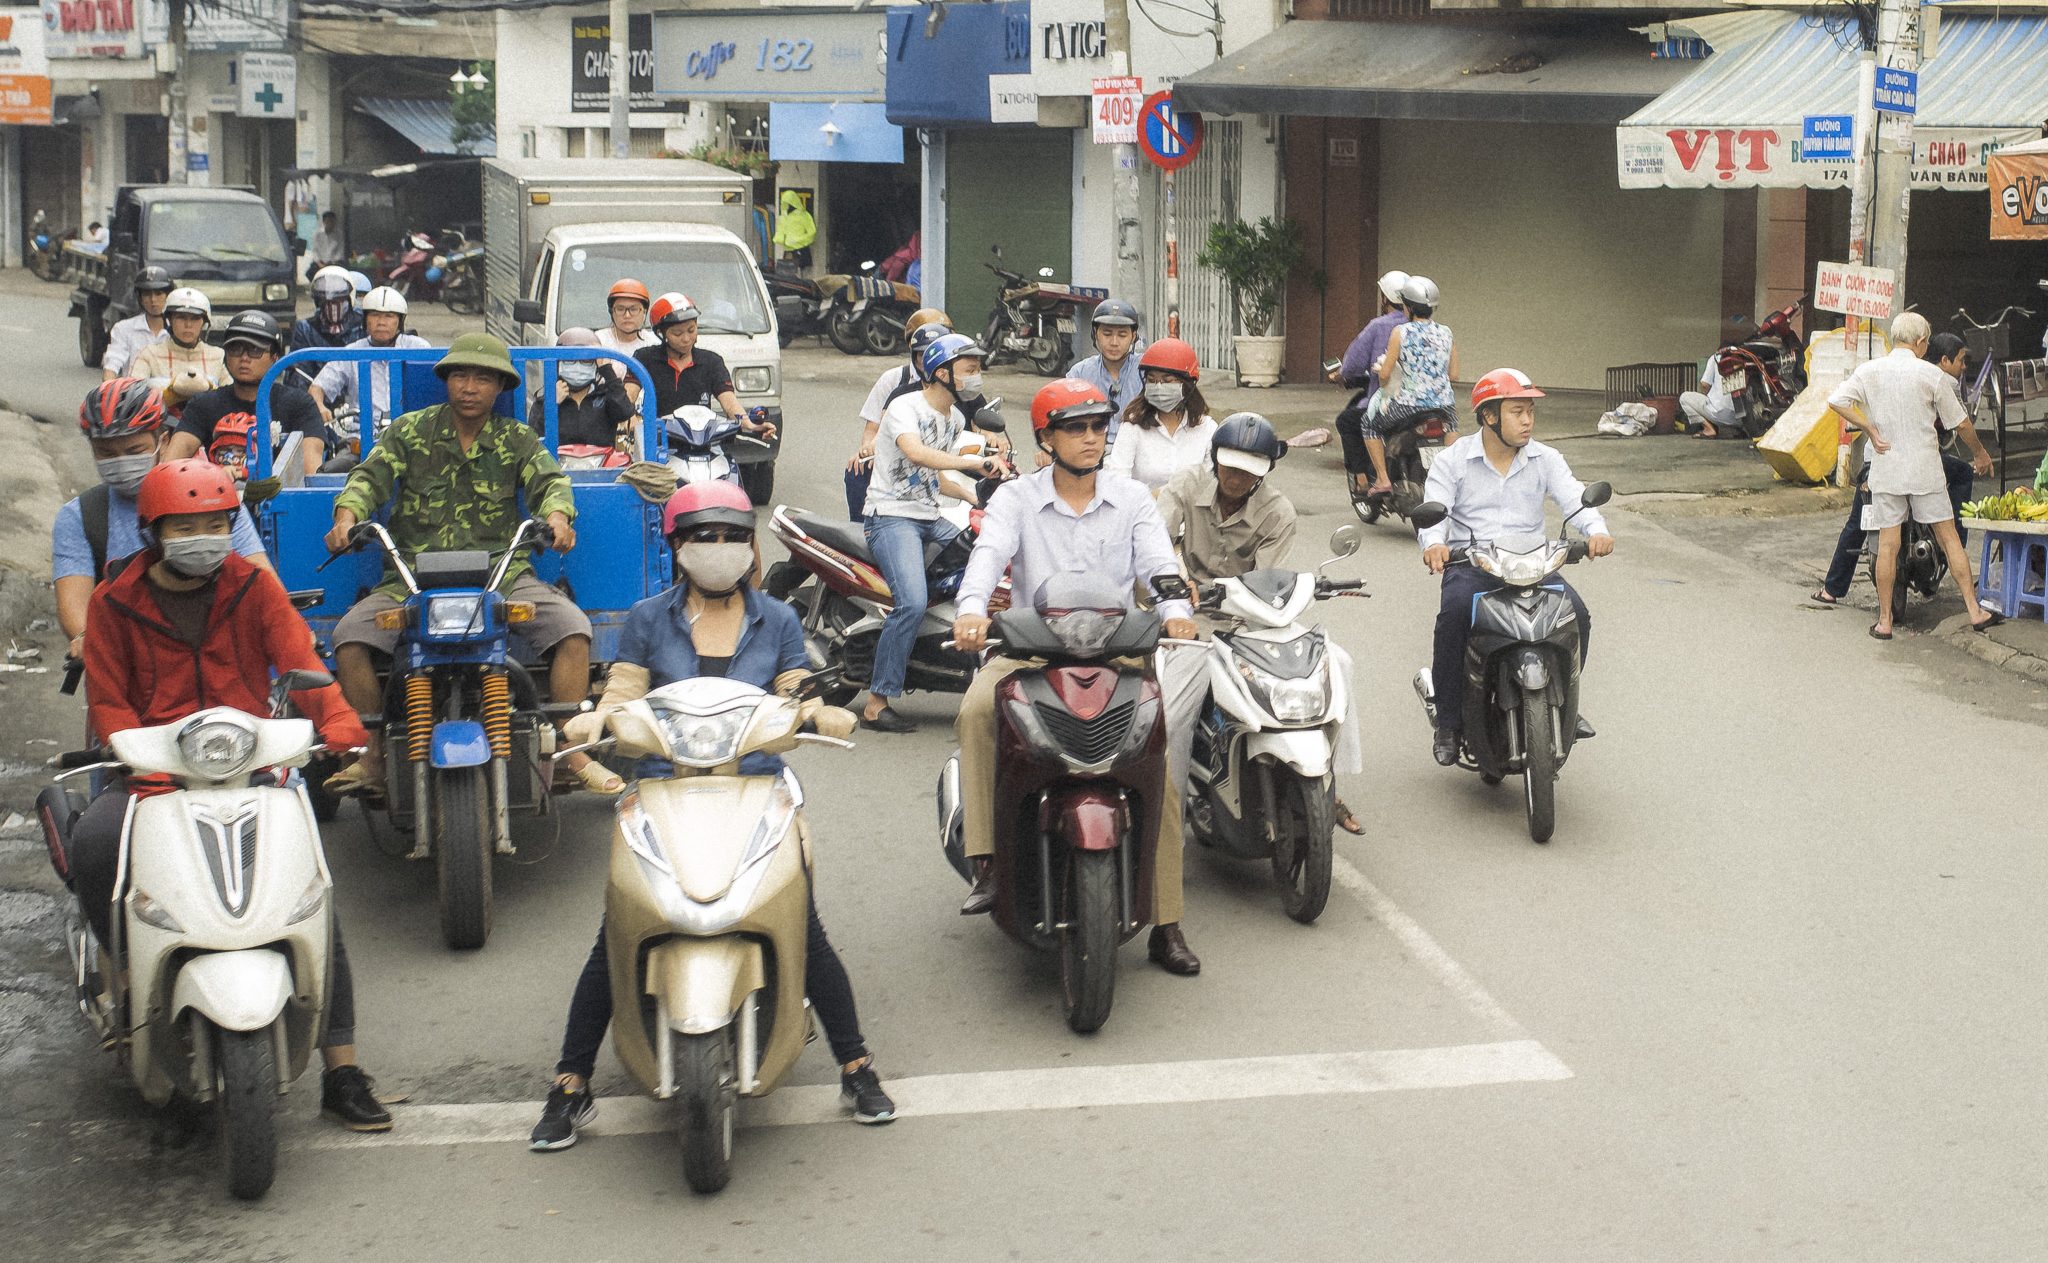 How to understand hotel transportation in Ho Chi Minh City, Vietnam